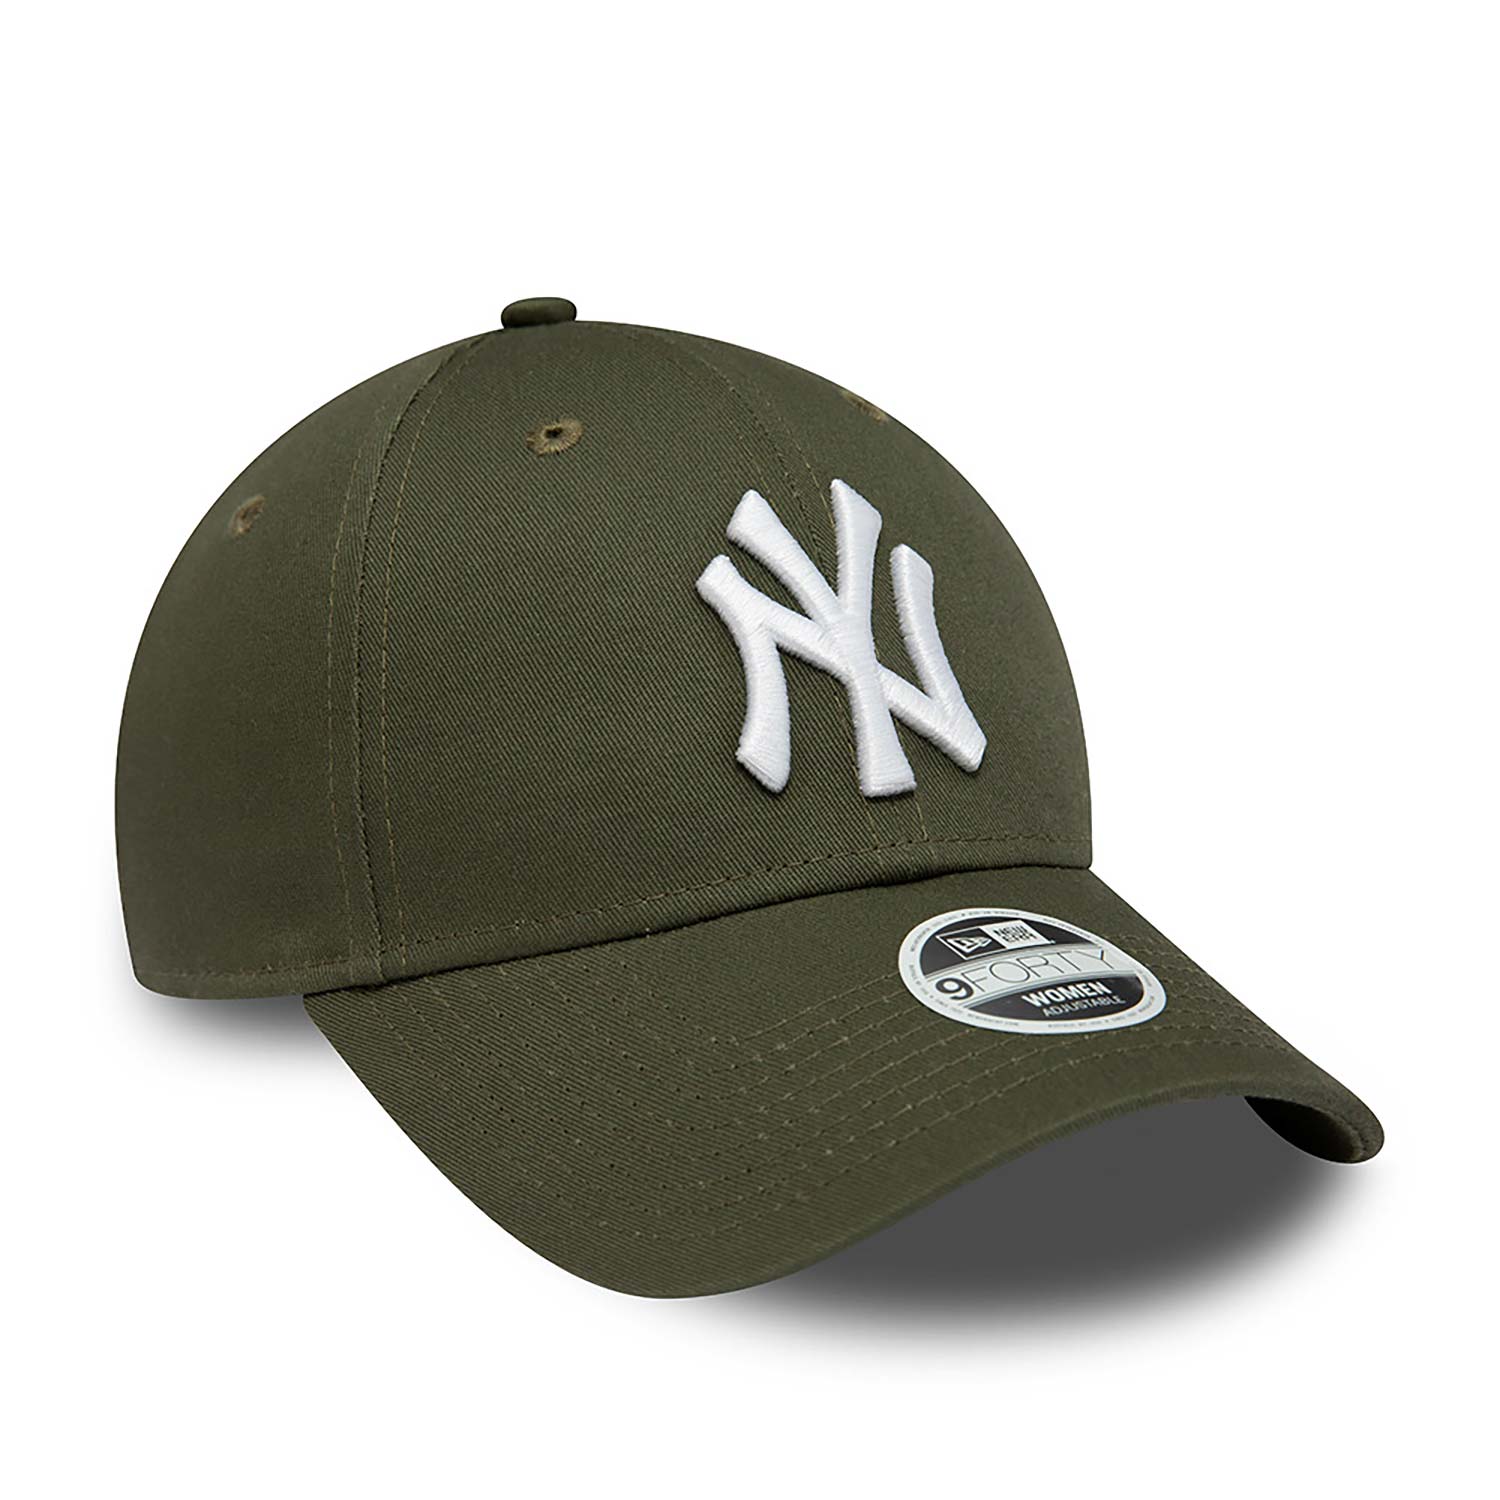 Casquette 9FORTY New York Yankees League Essential Vert - Femme